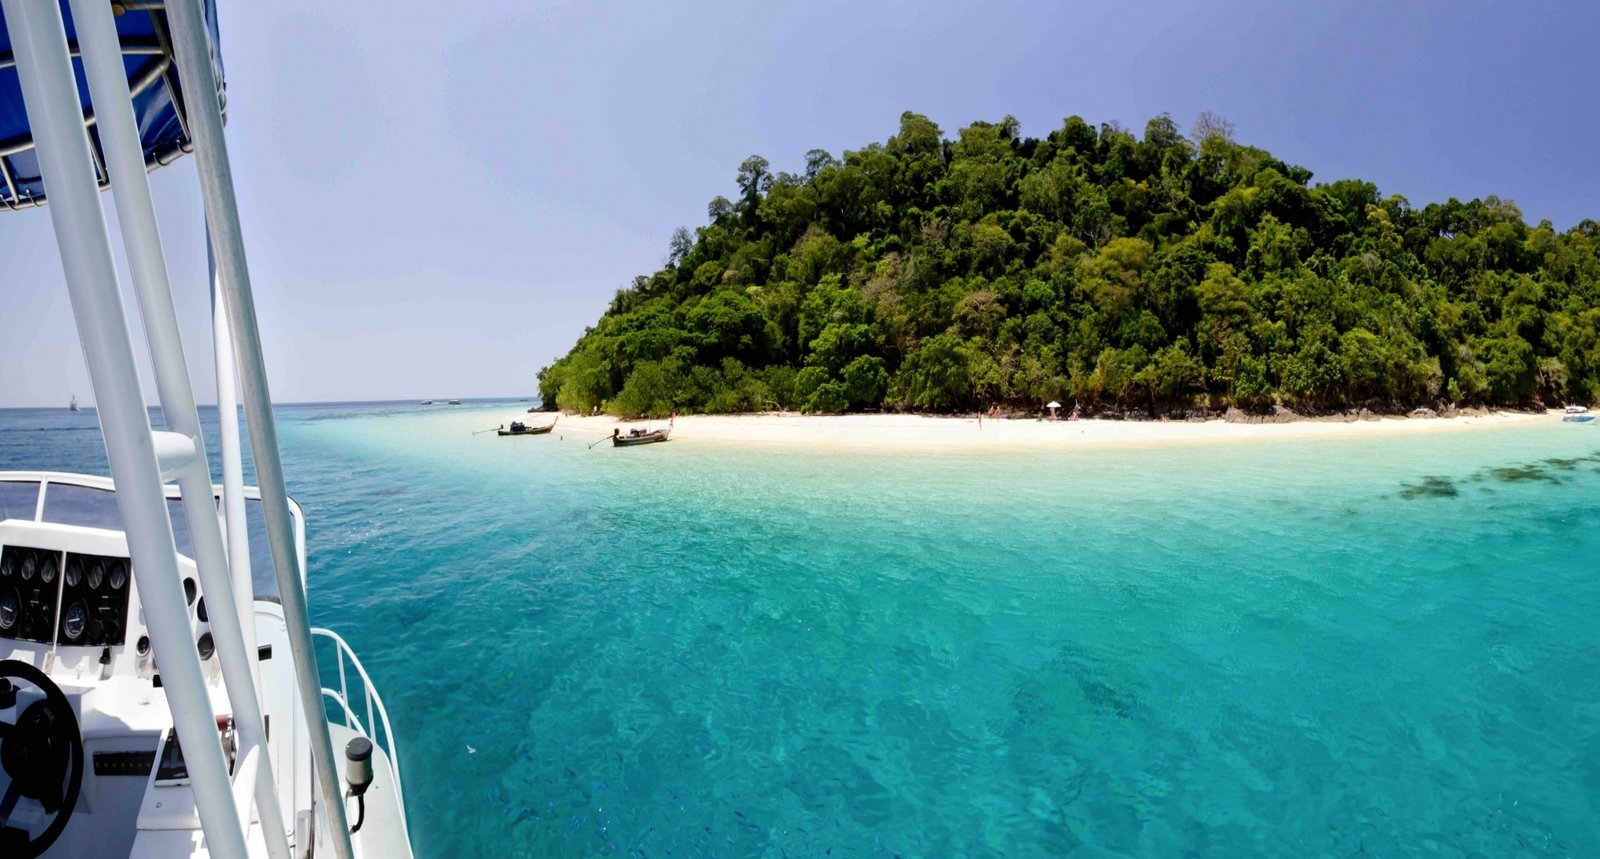 Rediscover Southern Thailand's tropical paradise